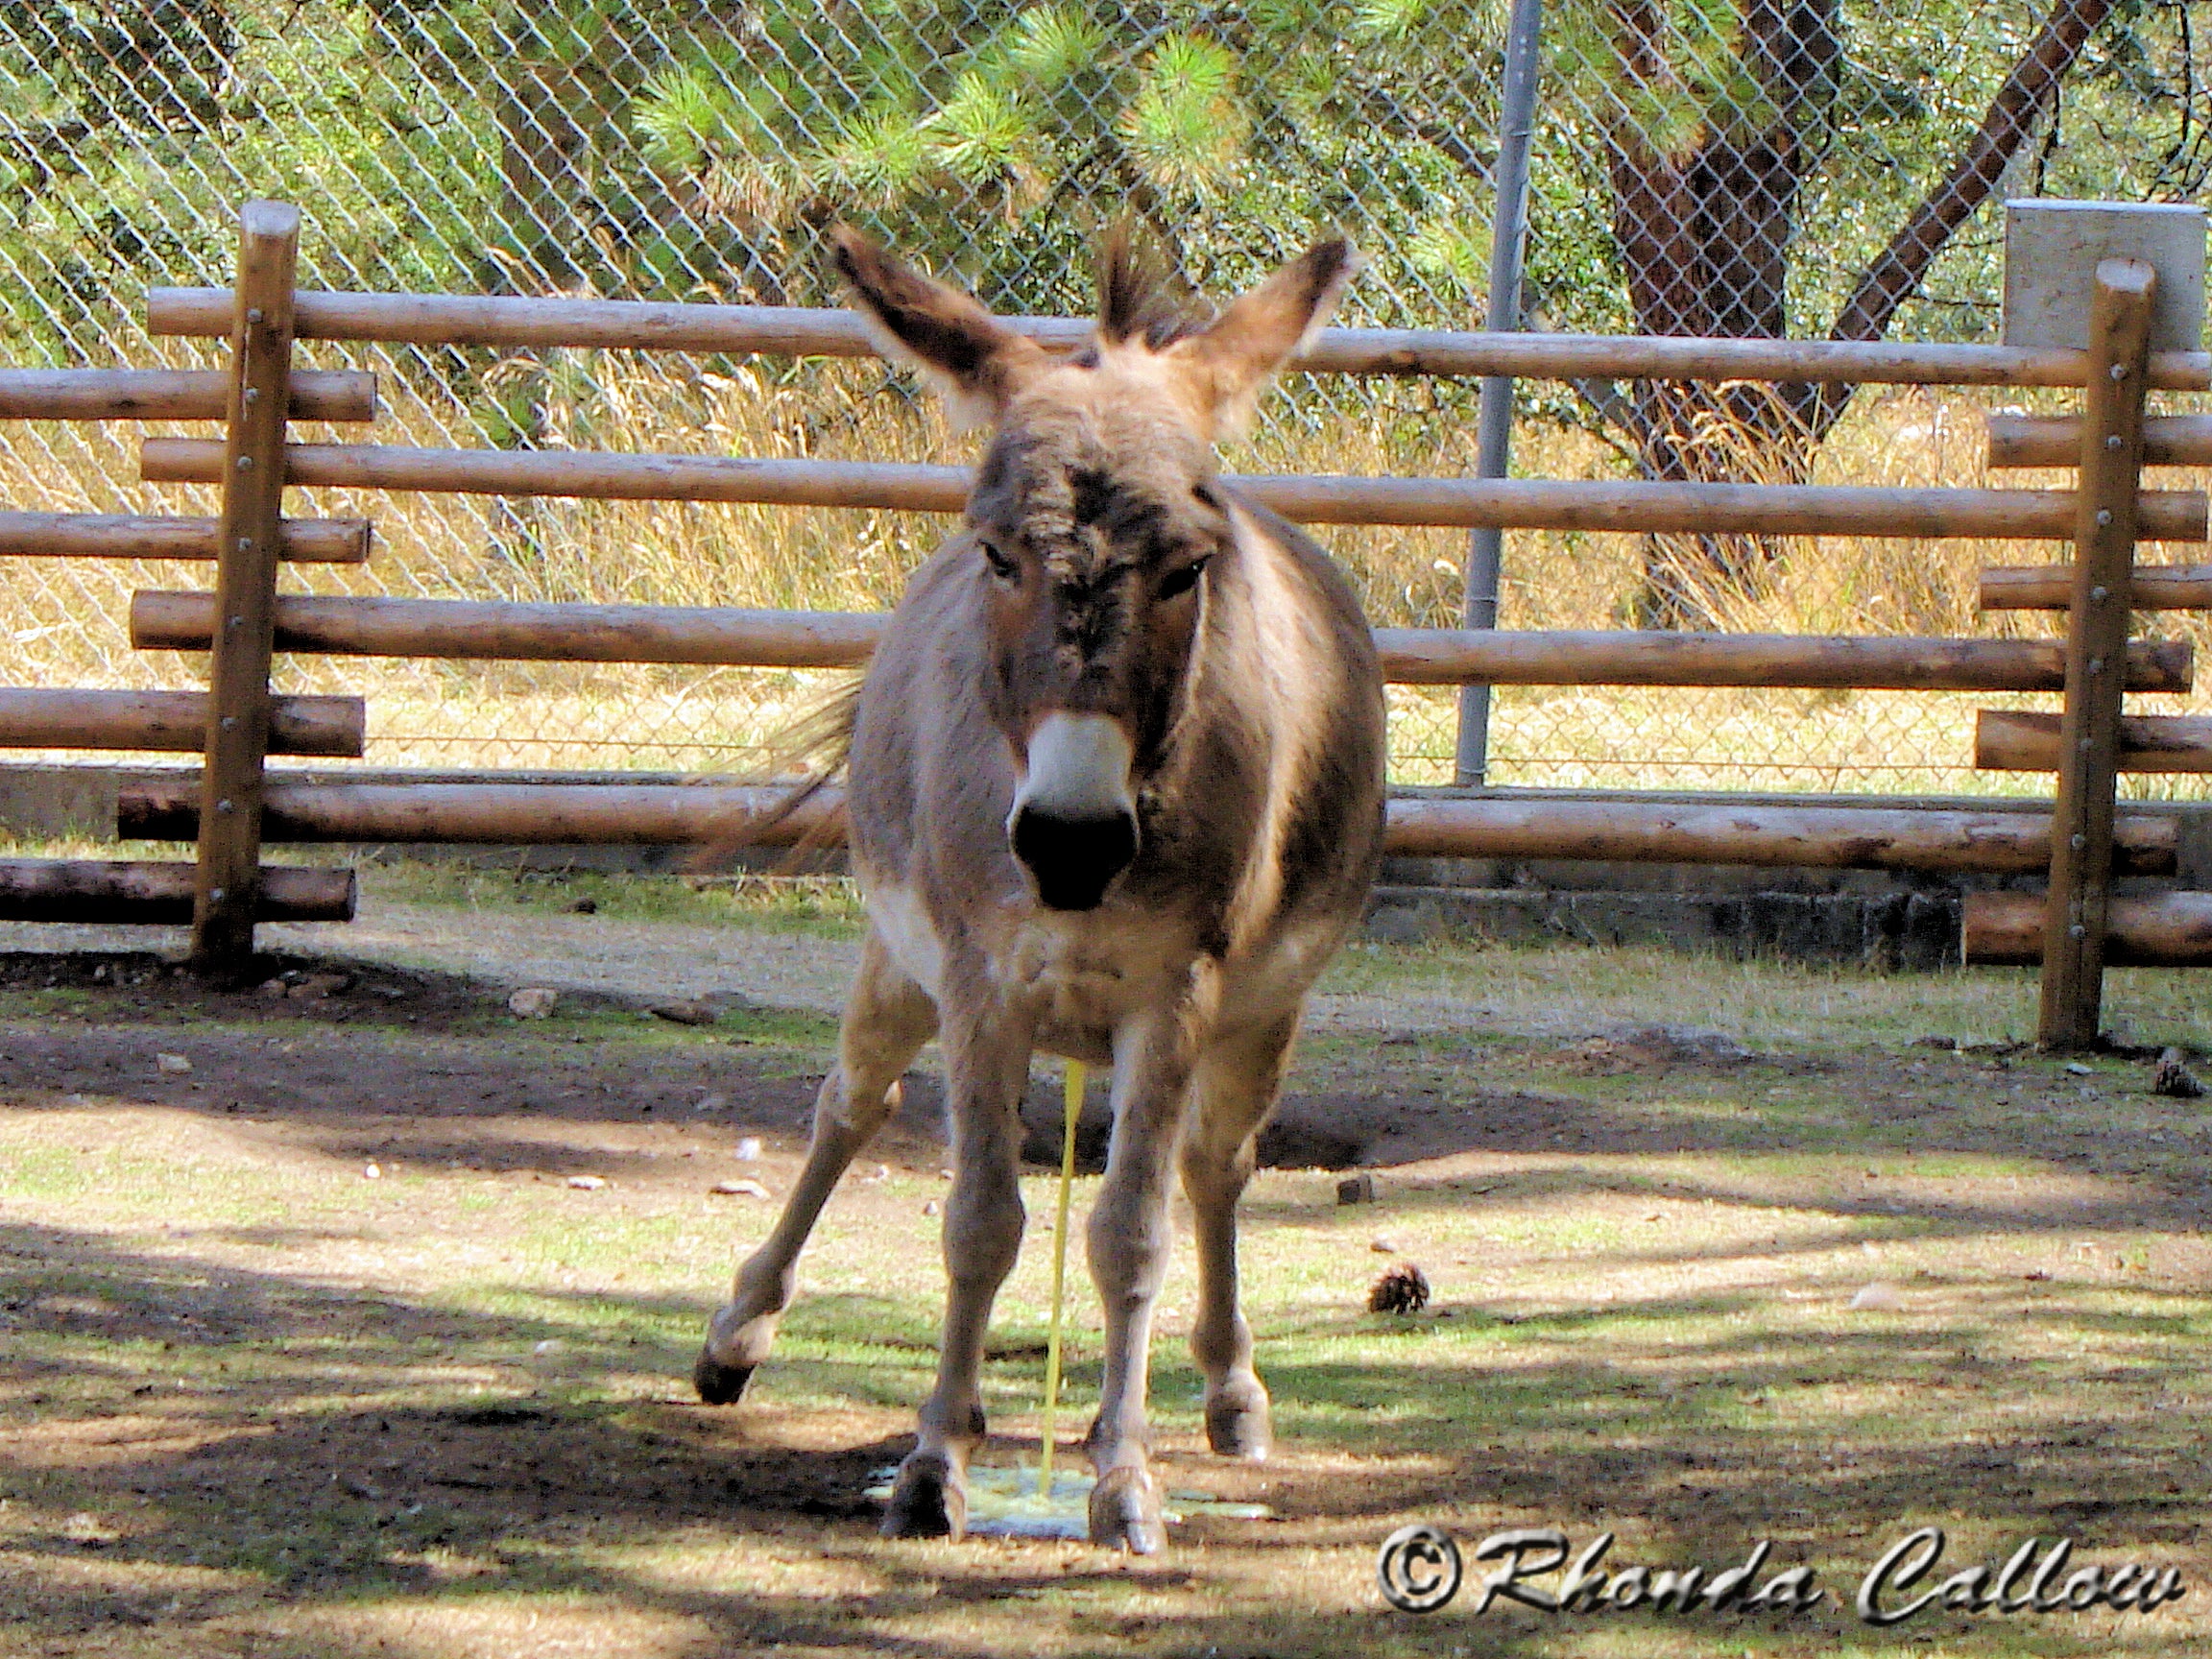 Funny animal photo of a donkey peeing at the Beacon Hill Petting Zoo in Victoria, BC, Canada